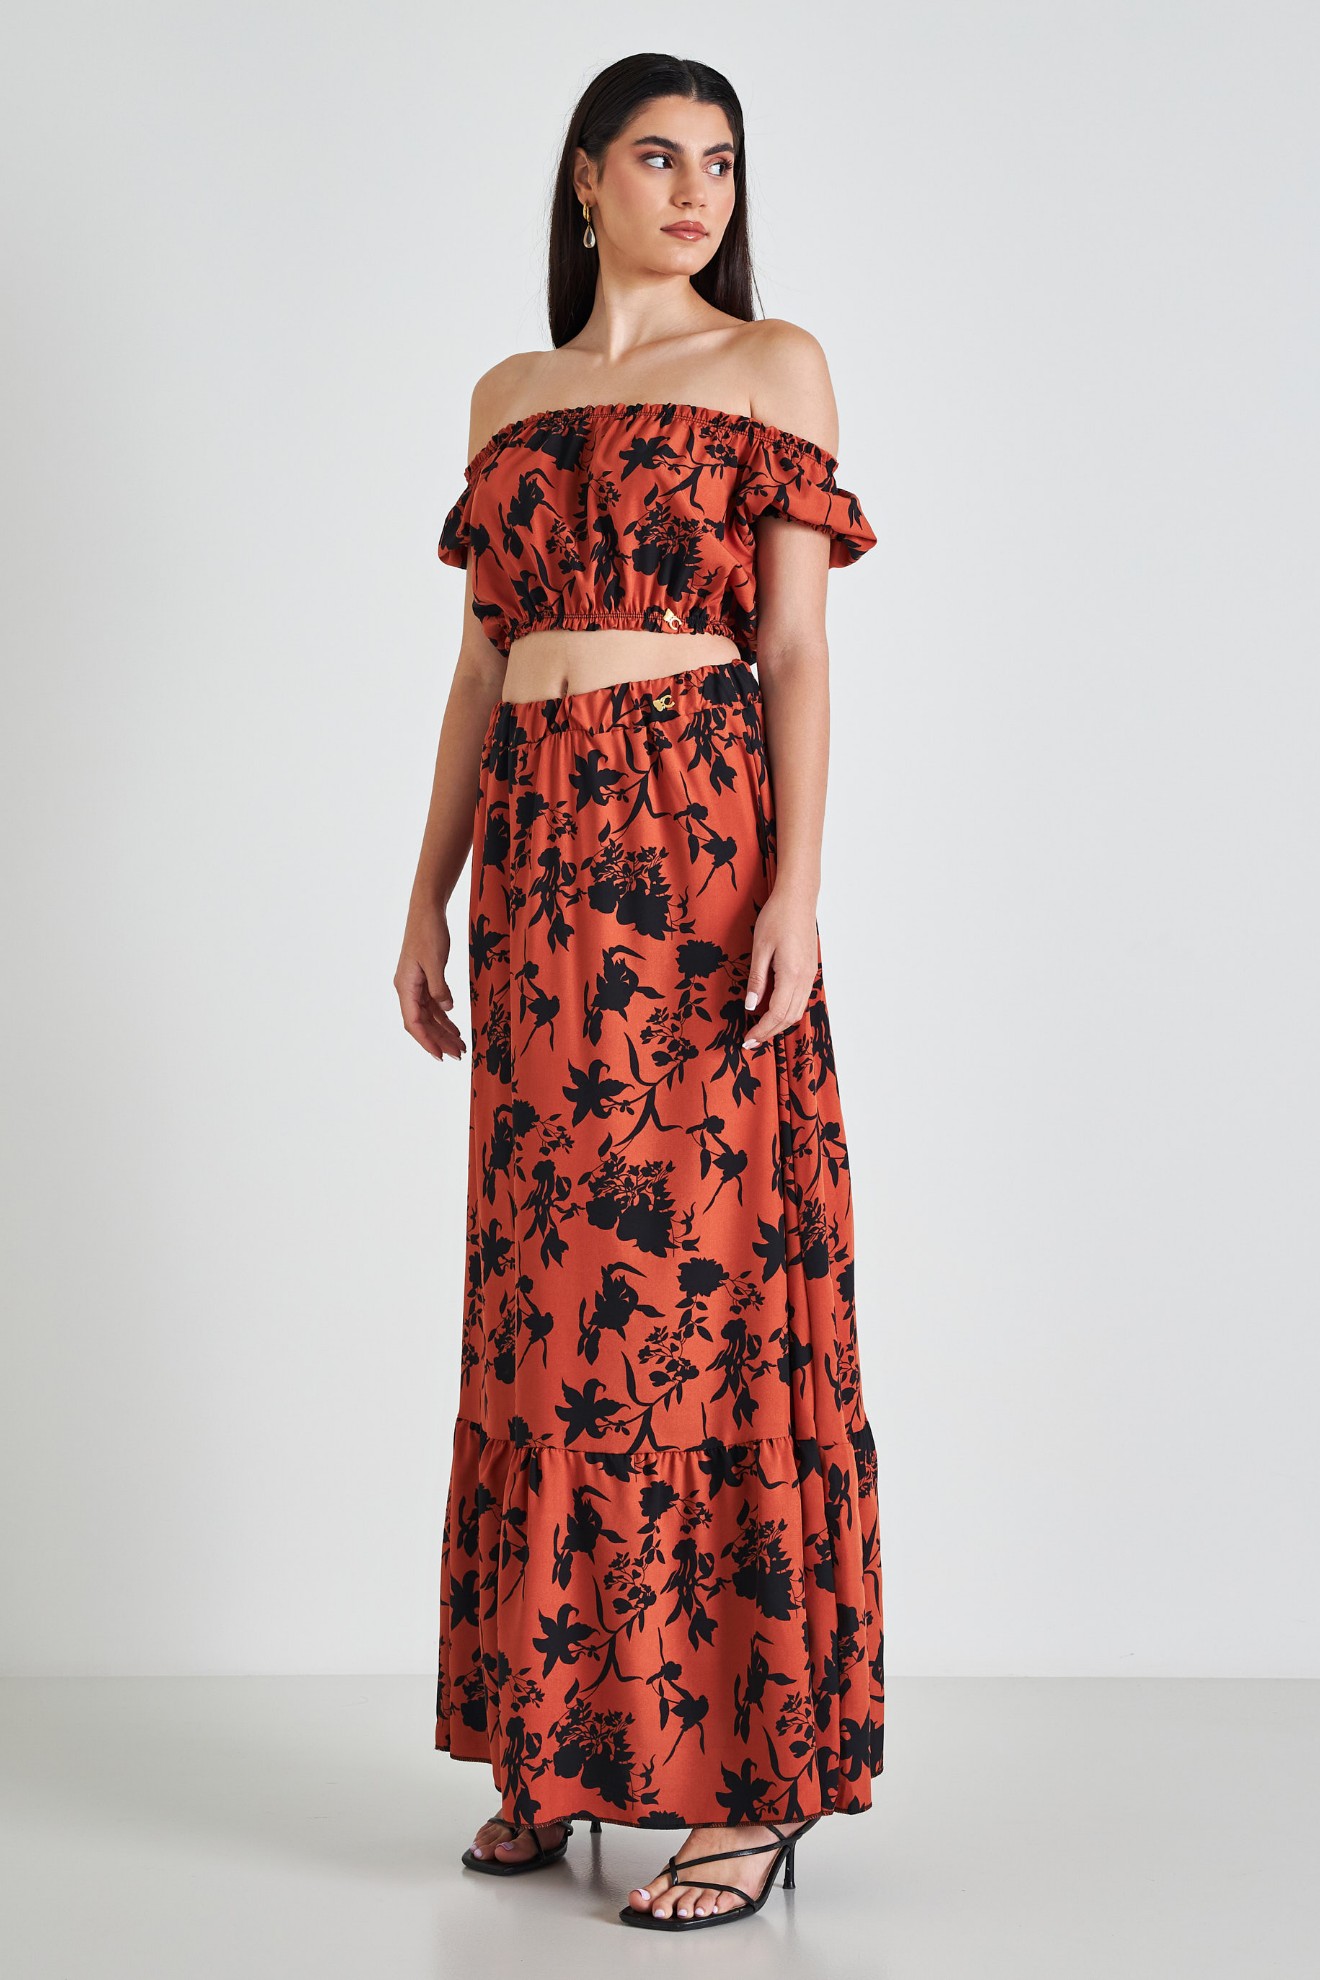 Picture of Maxi floral skirt